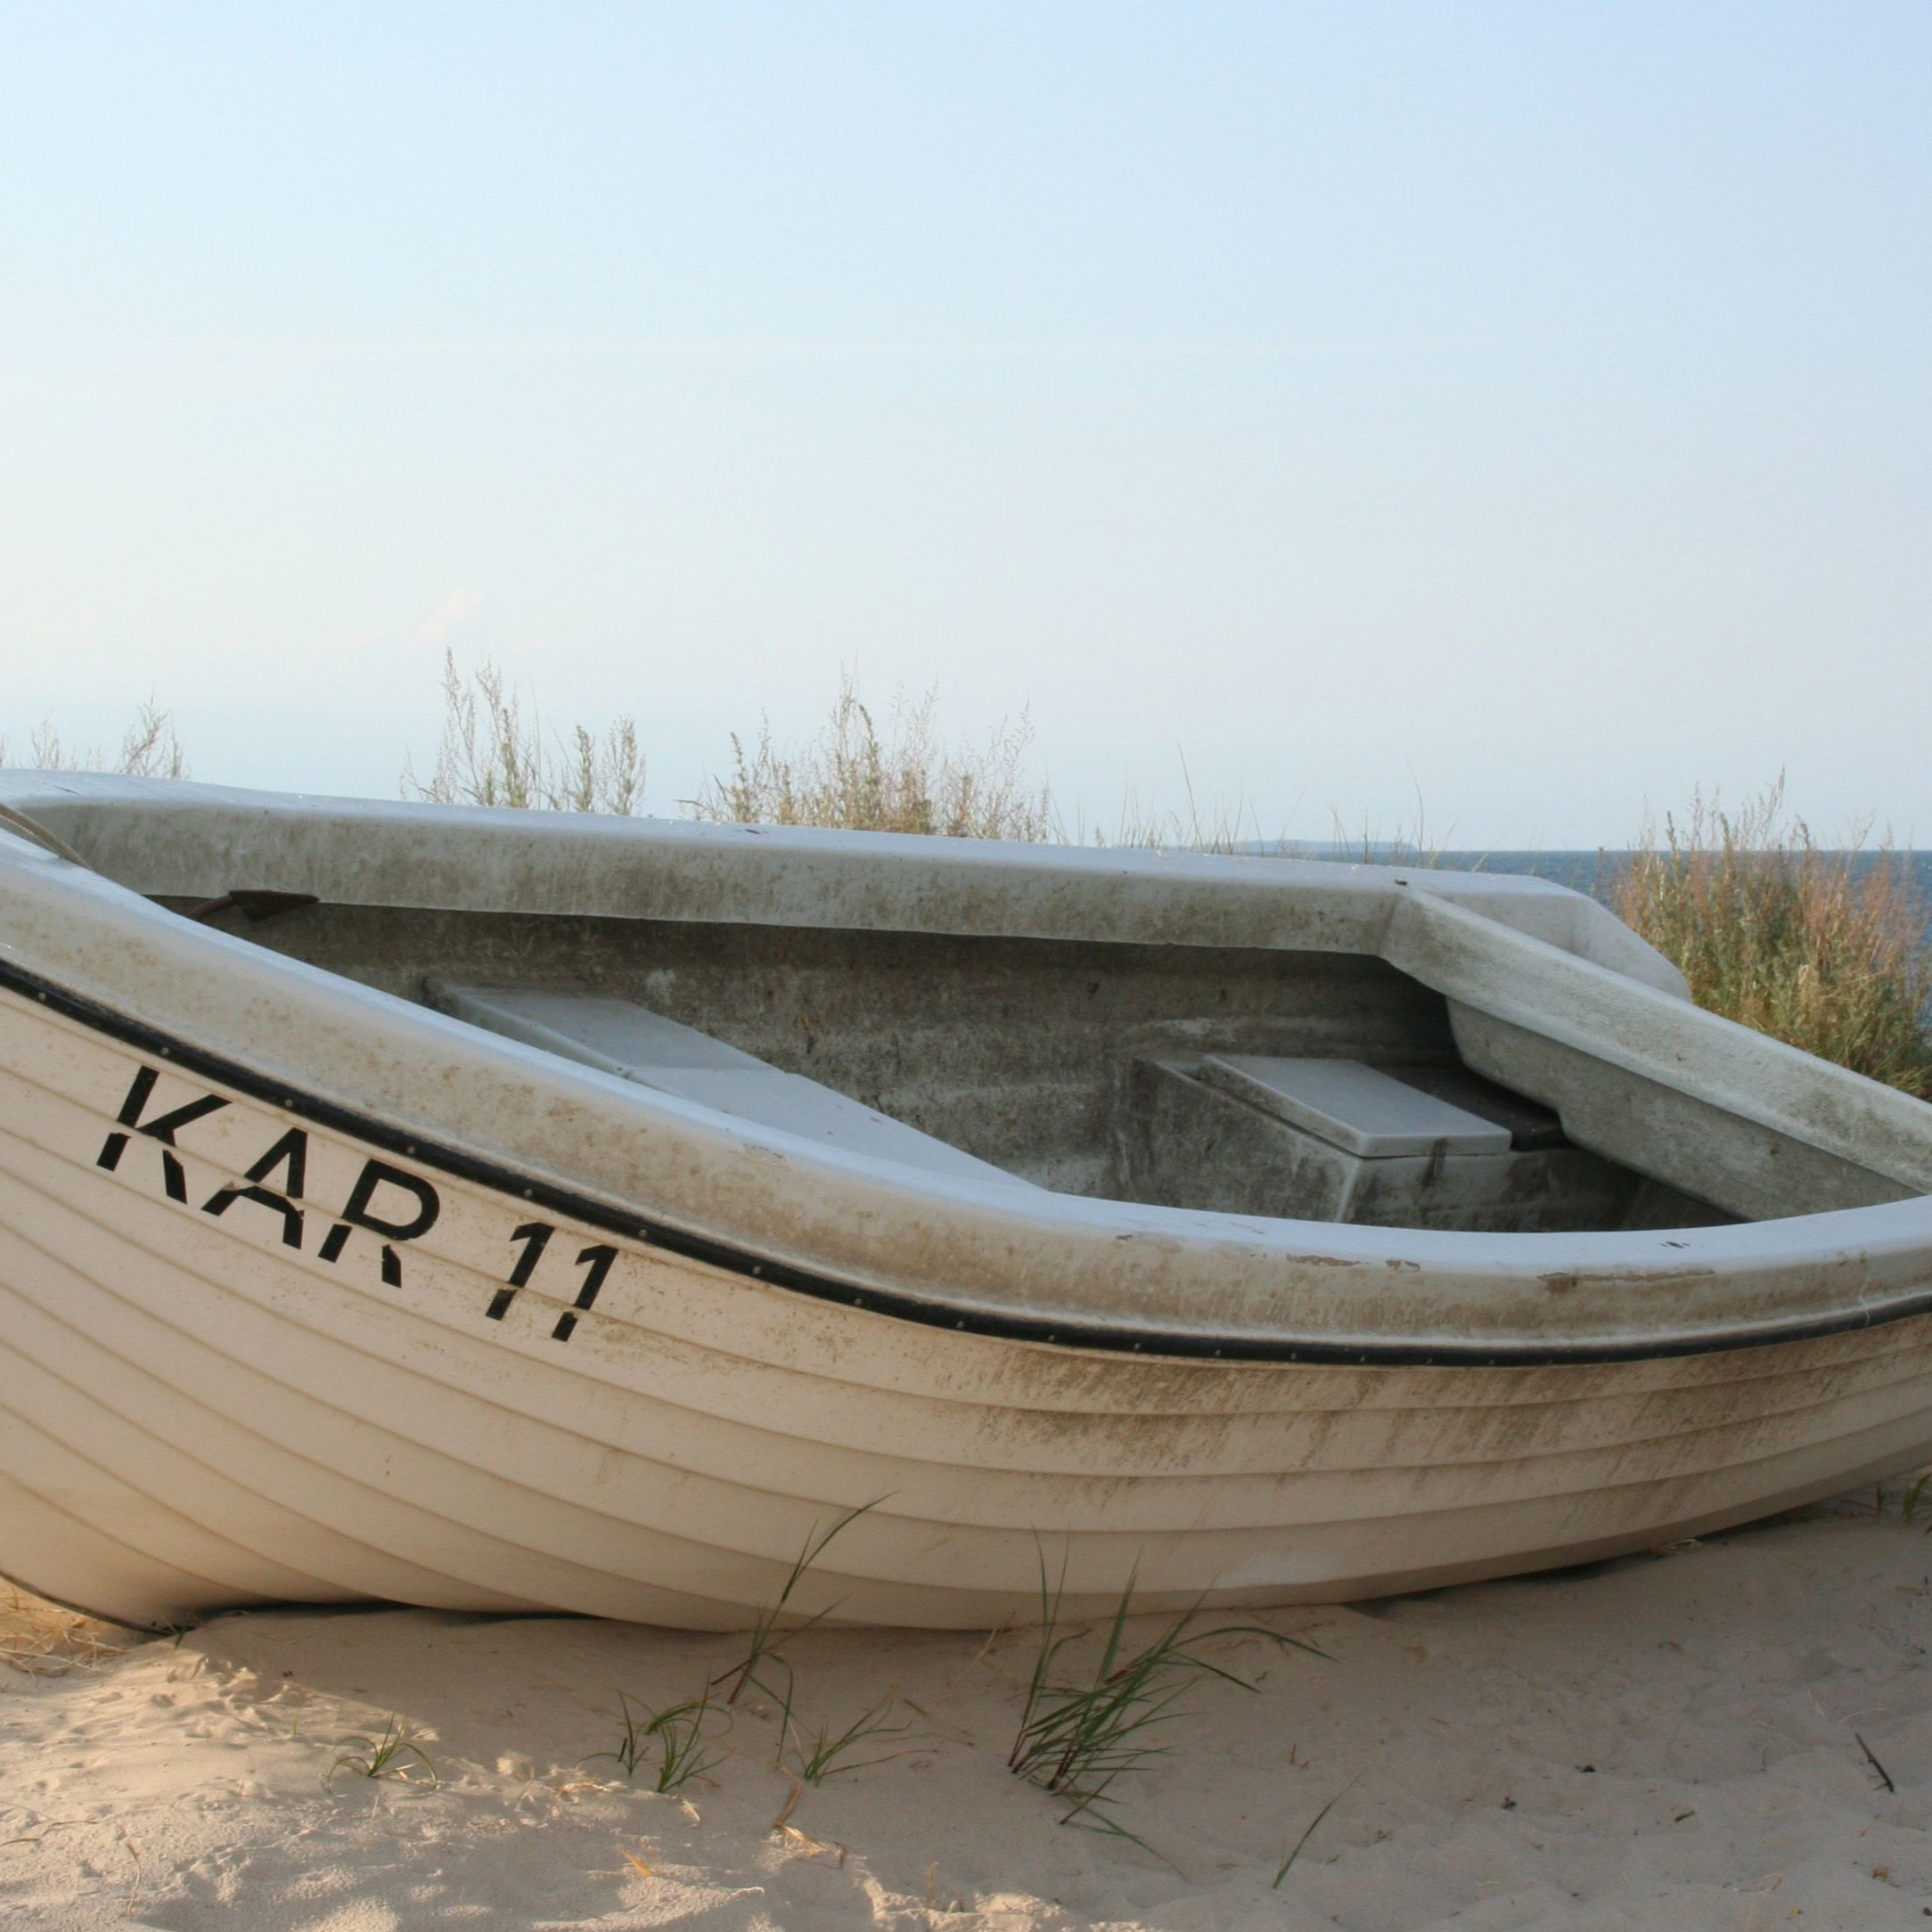 Boat at the beach